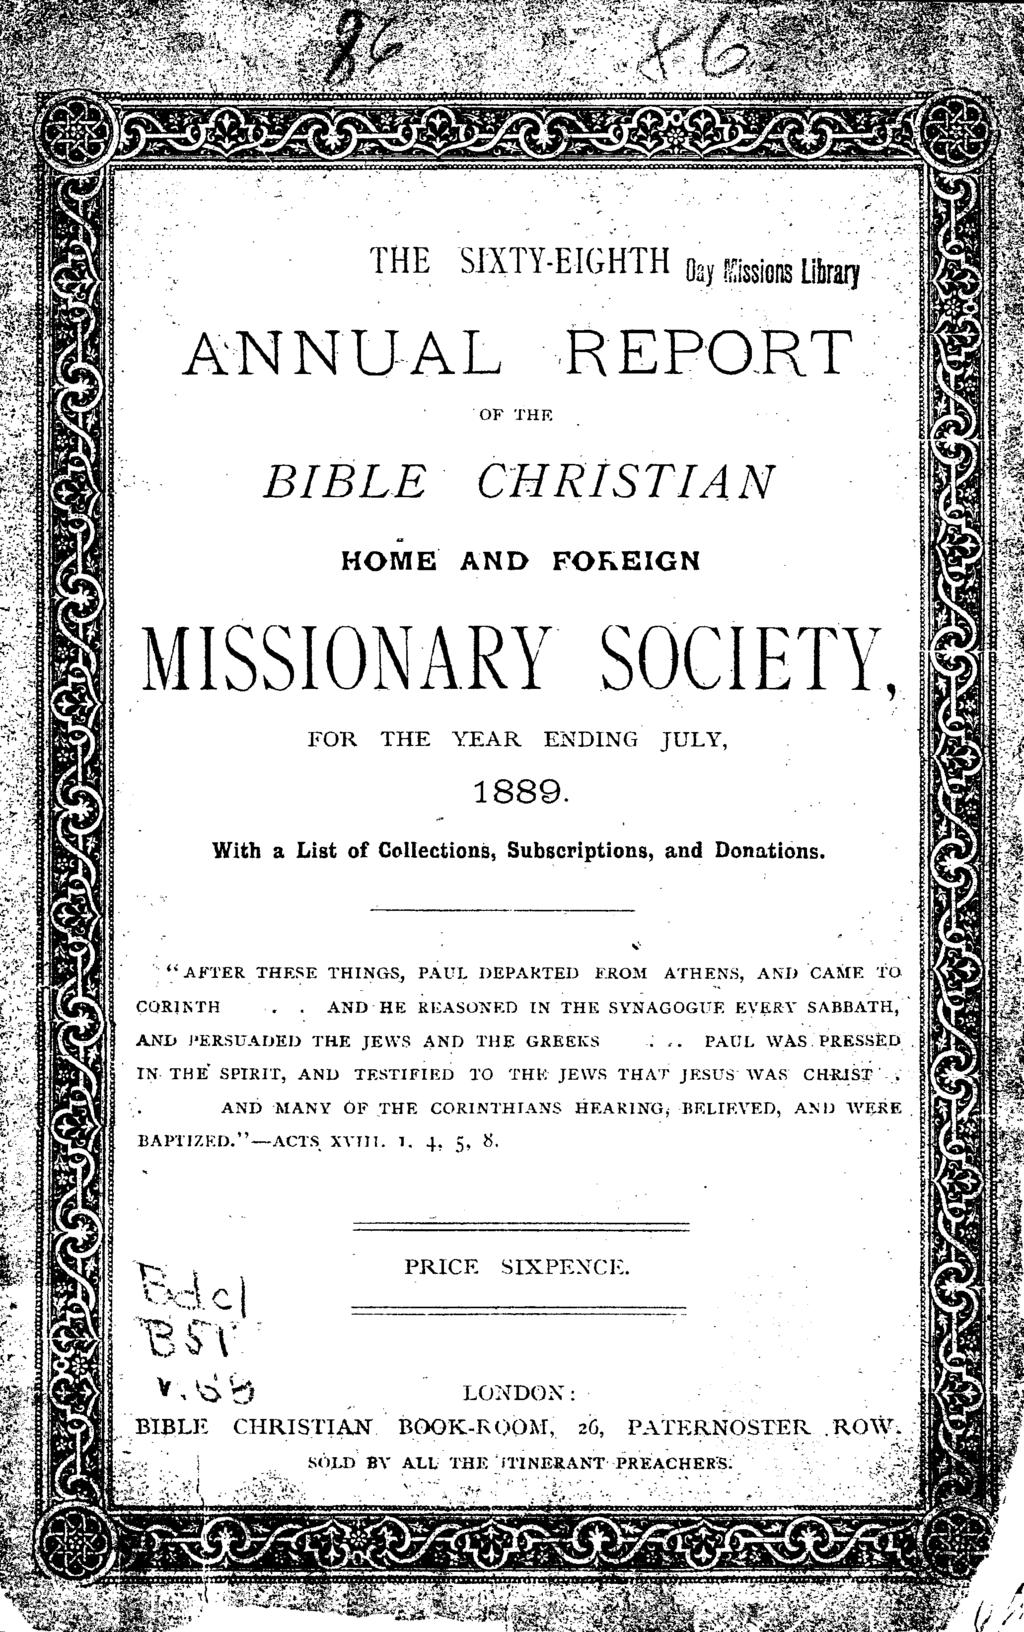 J I. / ~, /1 ANNU-AL THE SIXTY-EIGHTH Day fgissions library " OF THE BIBLE CHRiSTIAN HOME' AND FOKEIGN MISSIONARY SOCIETY, FOR THE YEAR ENDING JUL Y, 1889.